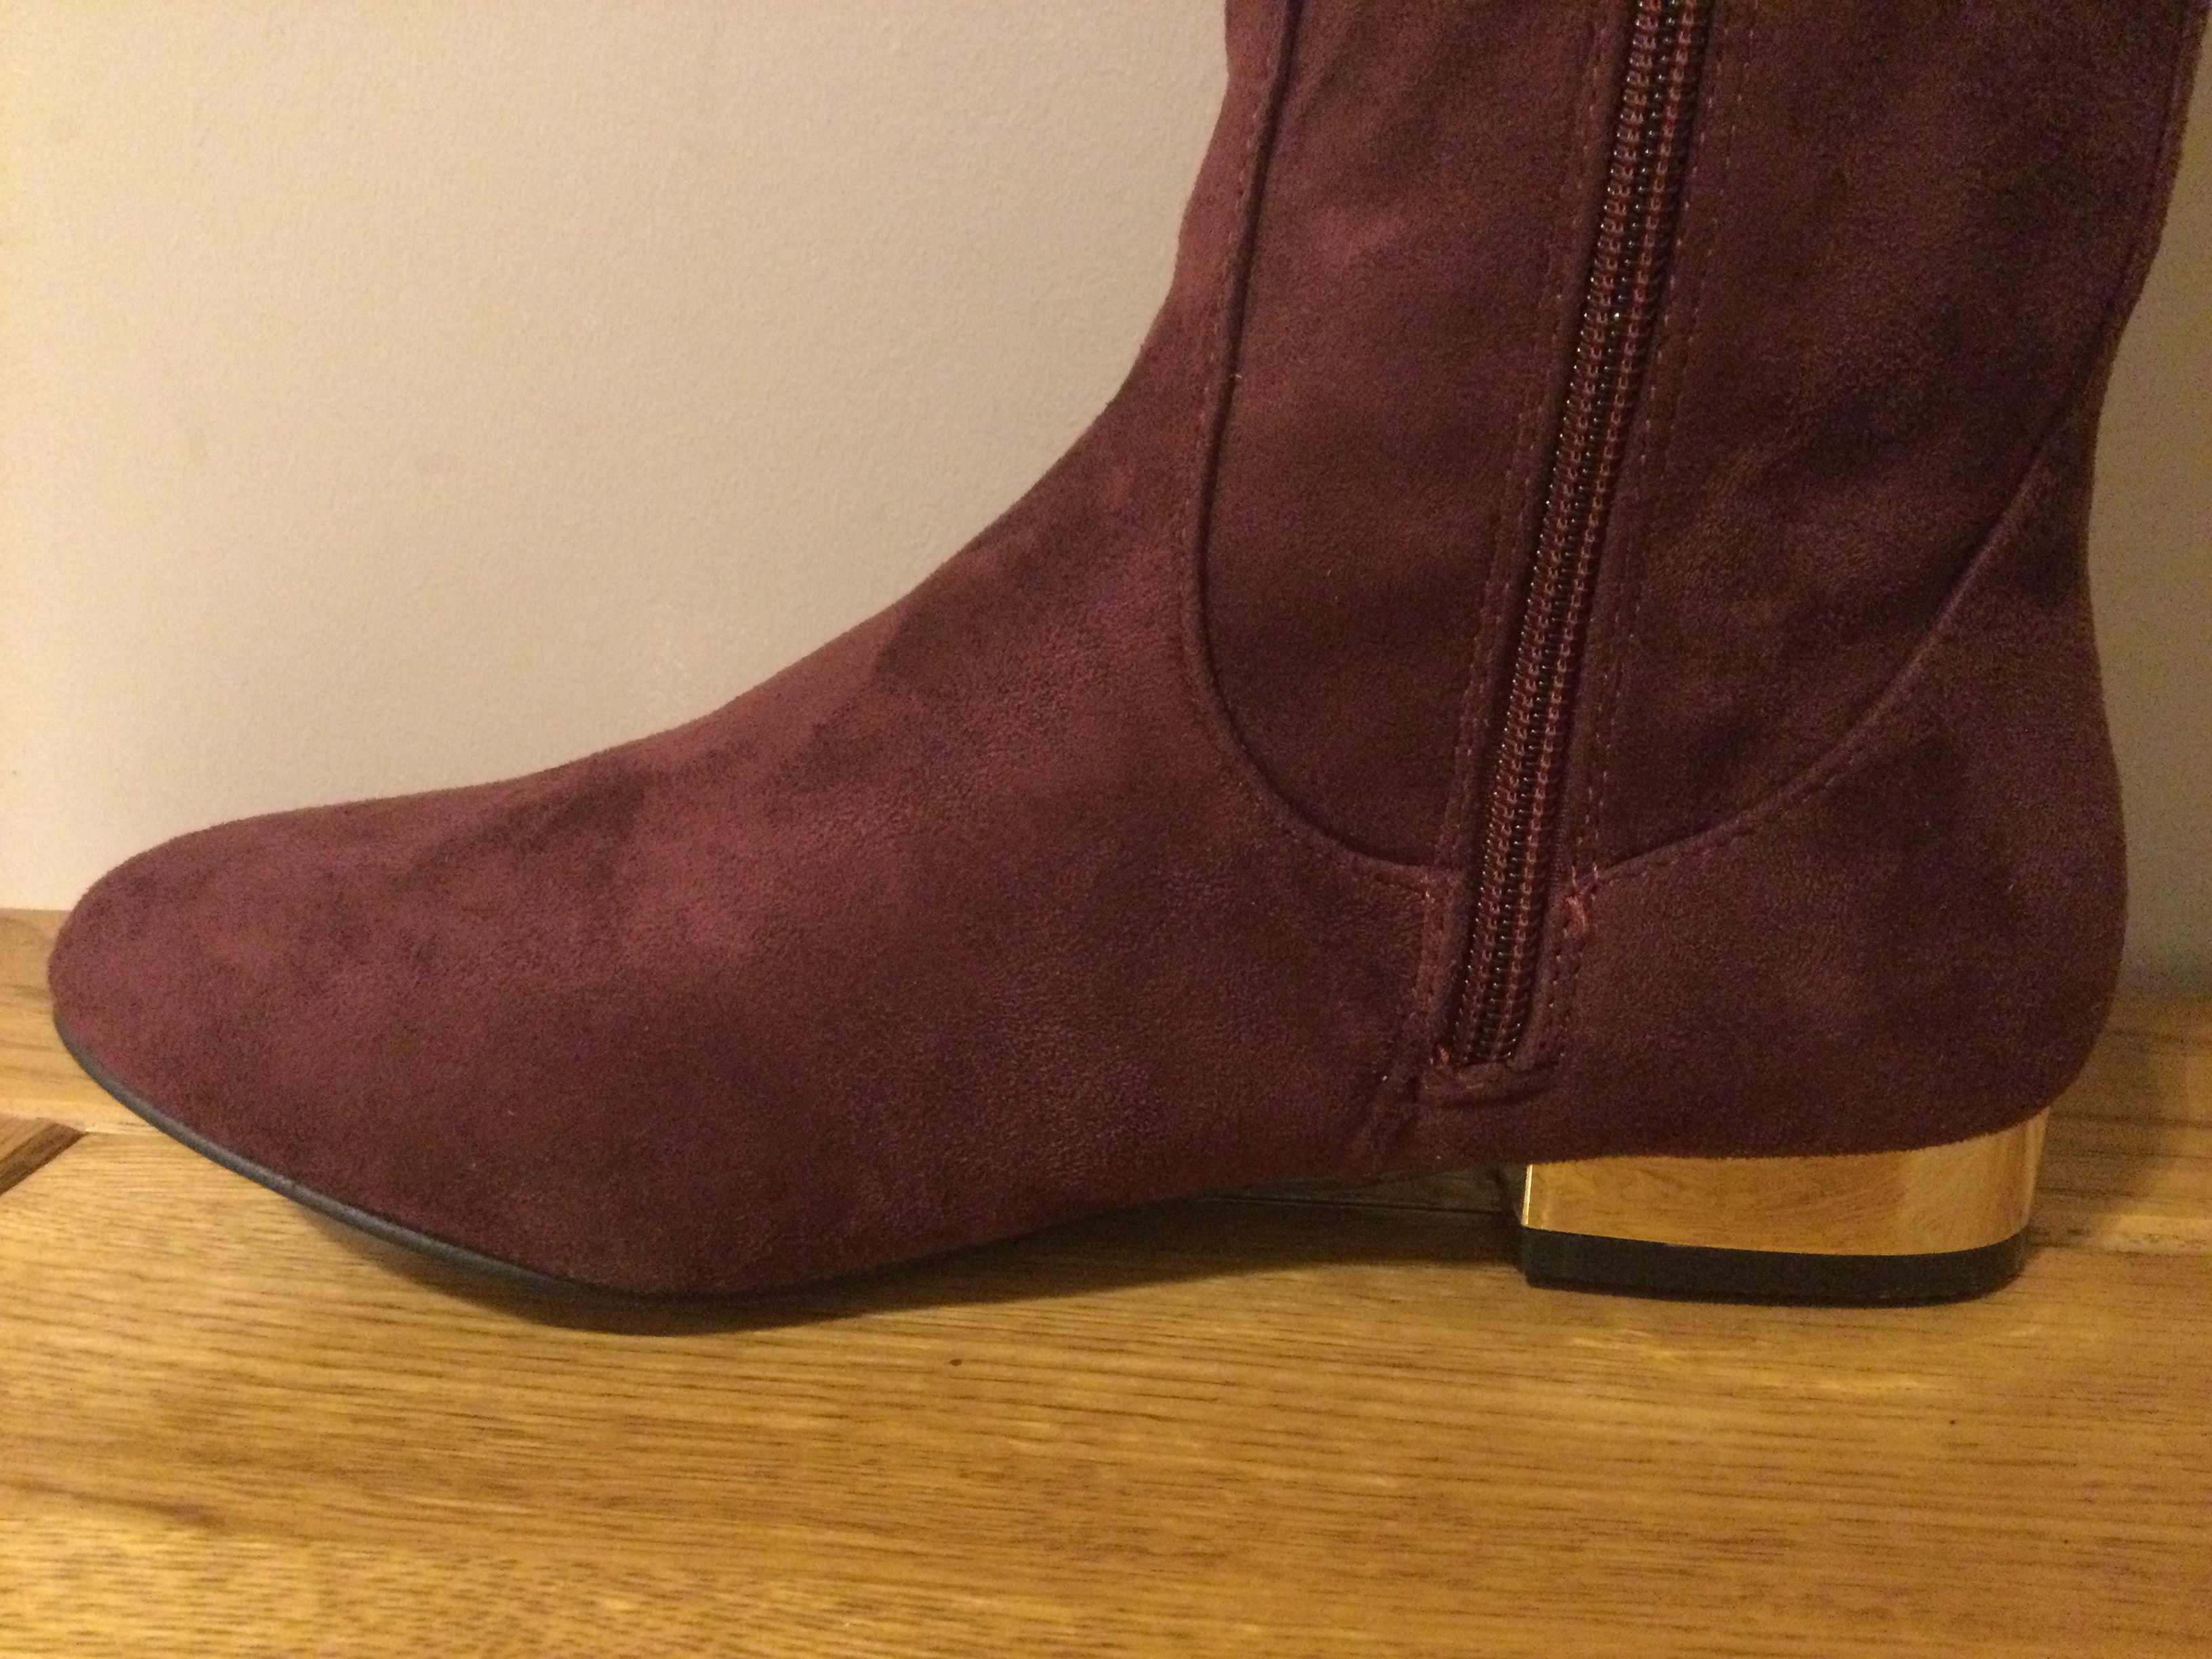 Dolcis “Katie” Long Boots, Low Heel, Size 4, Burgundy - New RRP £55.00 - Image 2 of 7